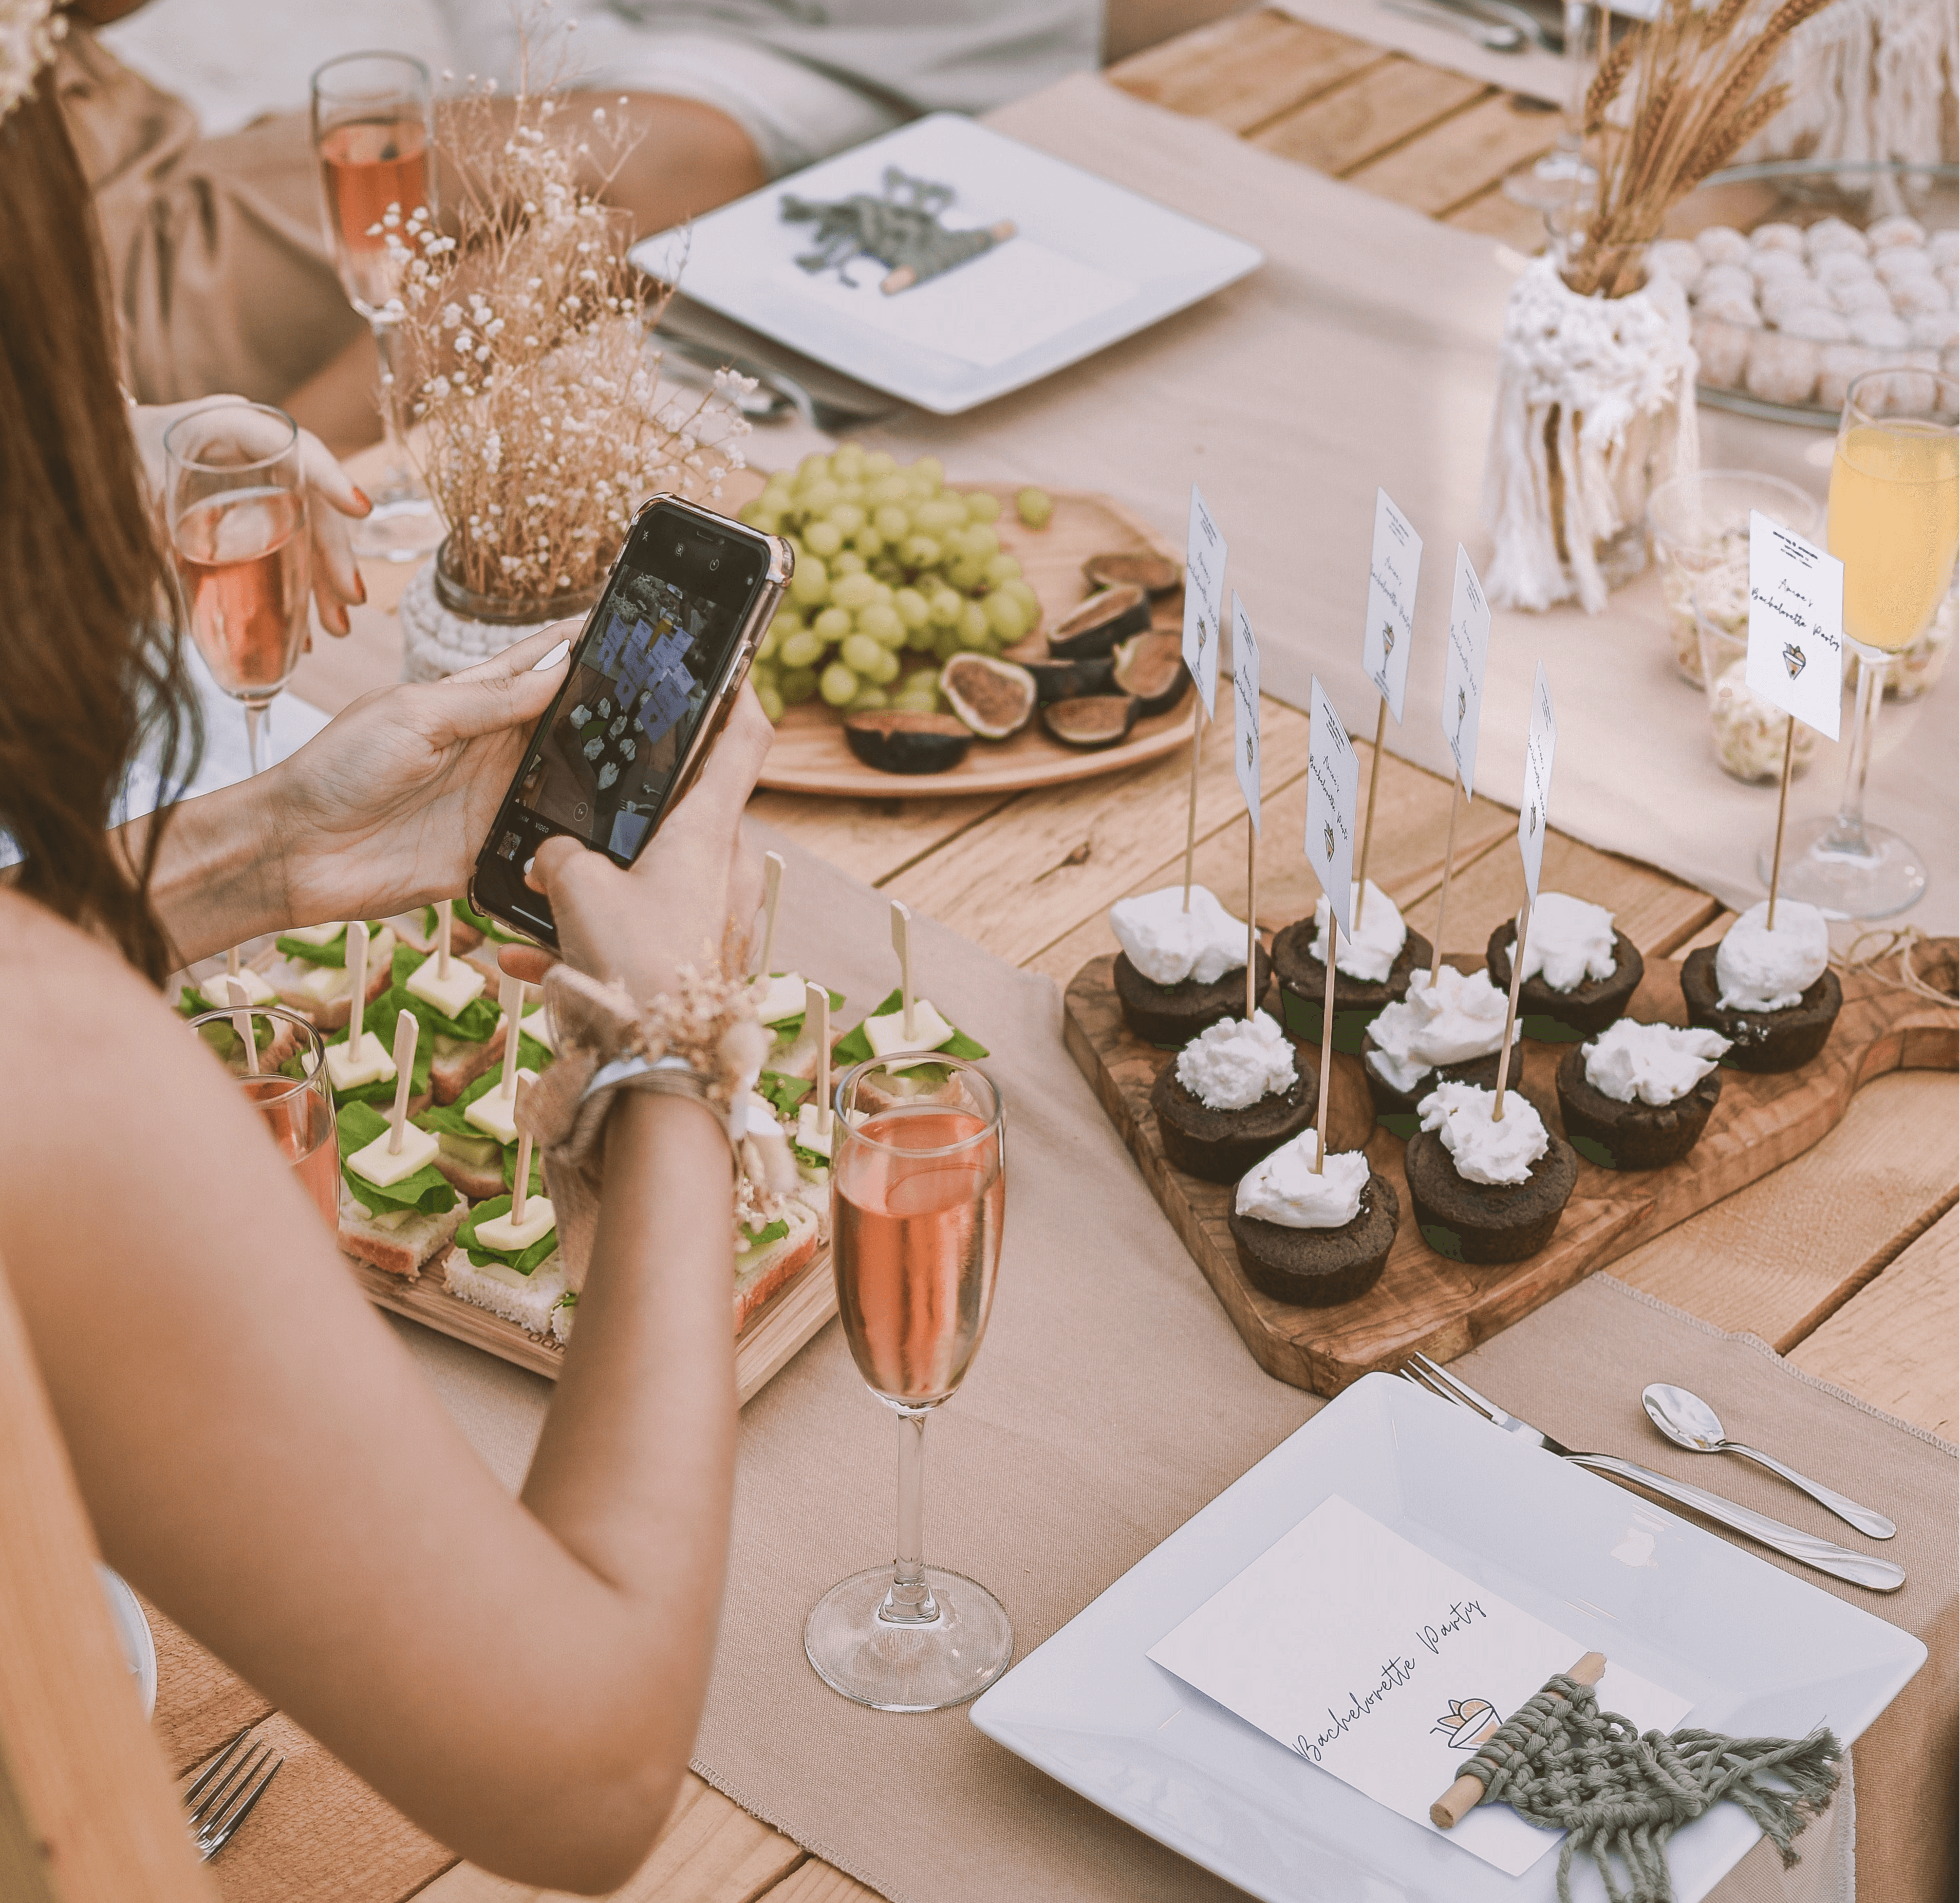 Woman taking a photo of dessert on mobile phone